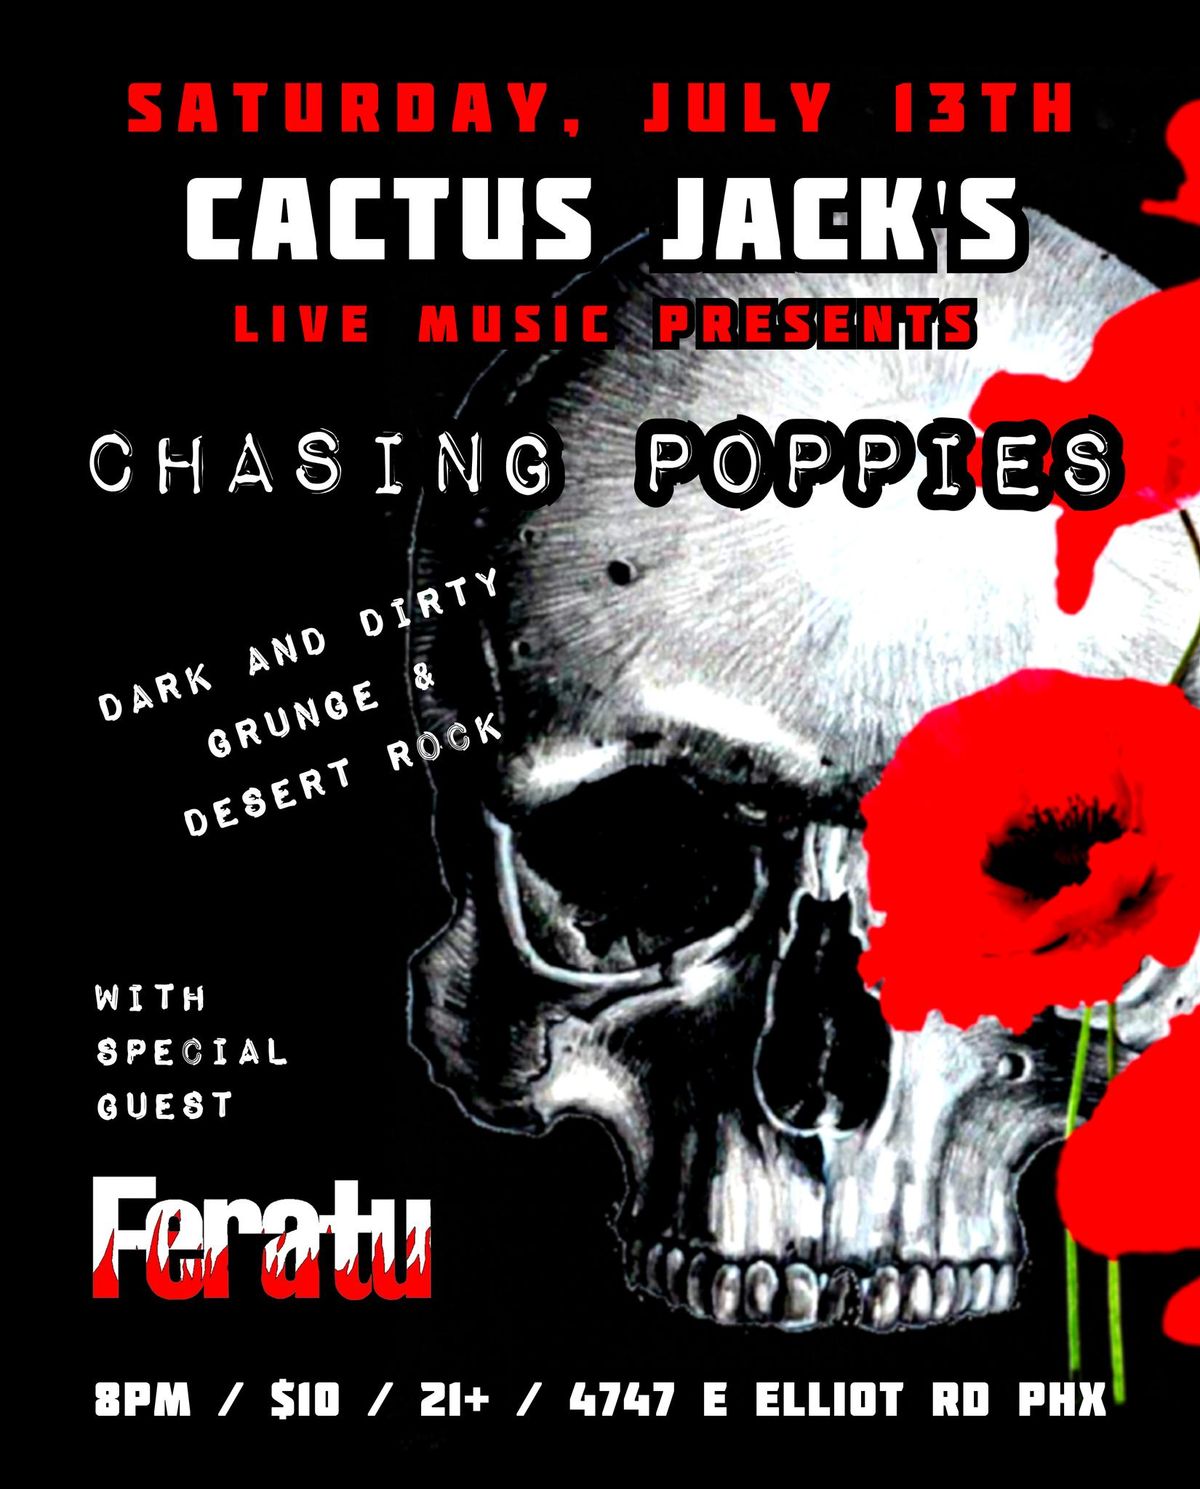 Chasing Poppies with Feratu Live at Cactus Jack's